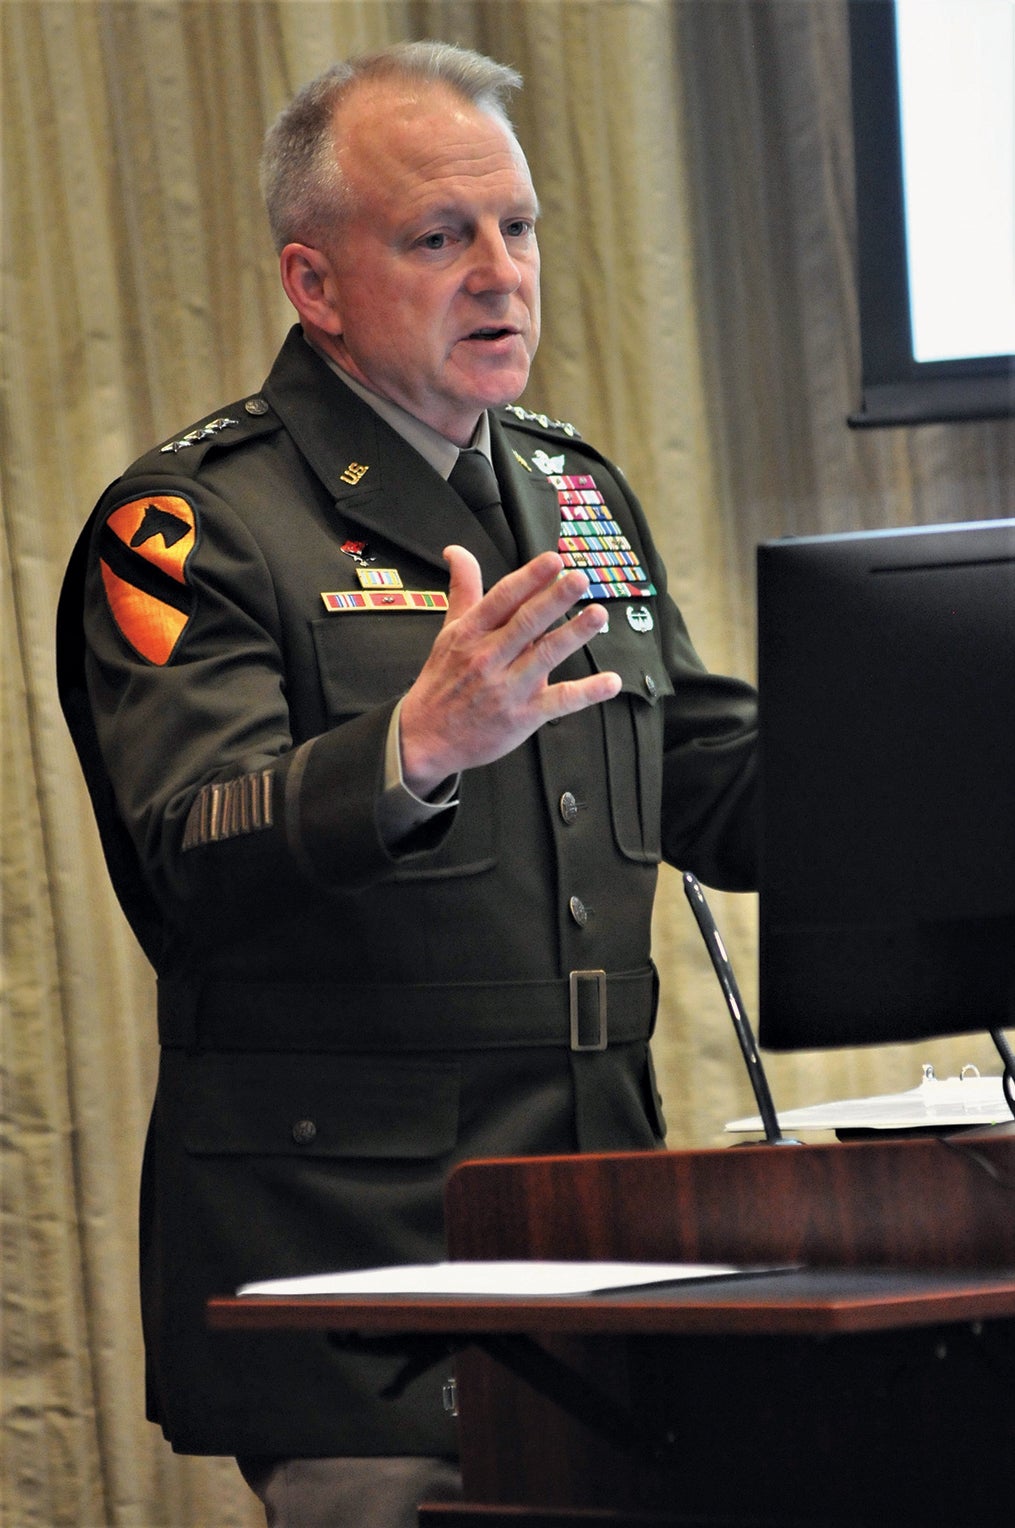 Lt. Gen. Douglas Gabram, commanding general of the U.S. Army Installation Management Command, speaks to graduates of the Logistics Basic Officer Leadership Course at Fort Lee, Virginia. (Credit: U.S. Army/T. Anthony Bell)